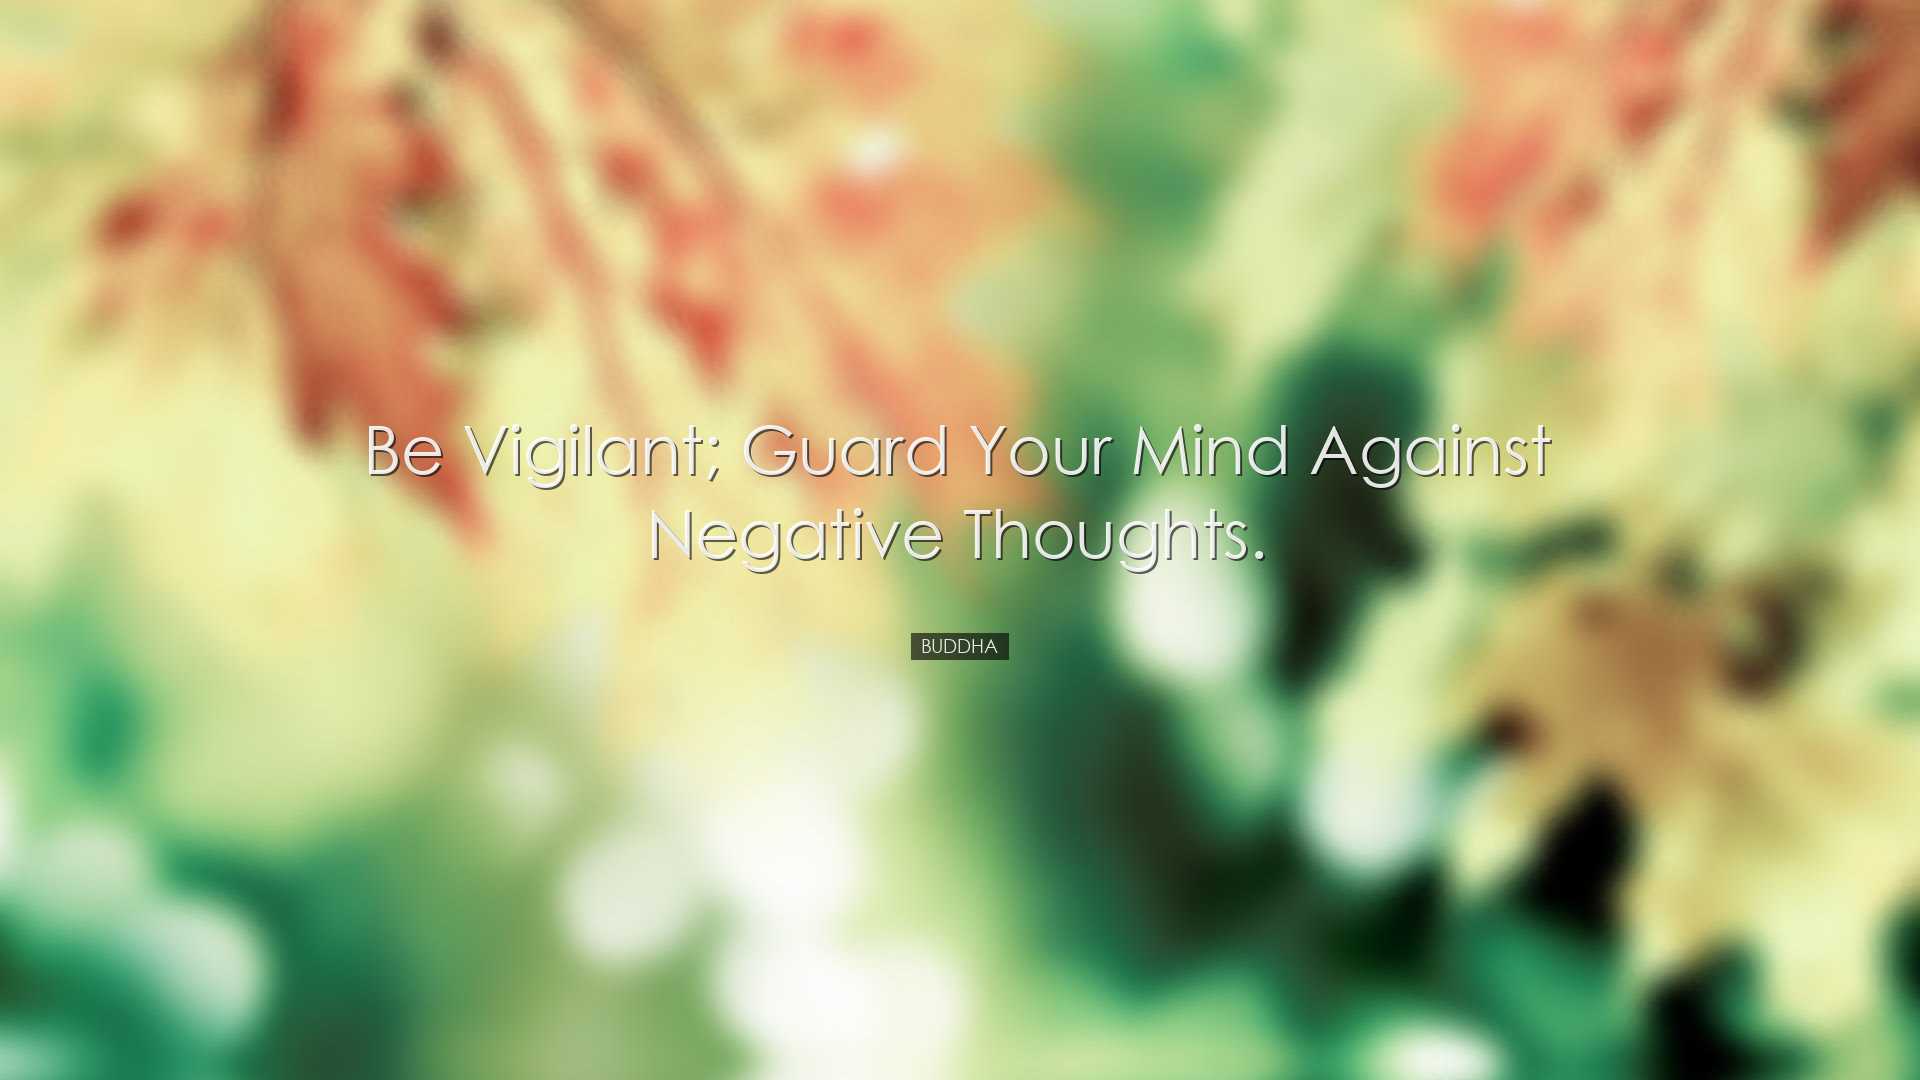 Be vigilant; guard your mind against negative thoughts. - Buddha